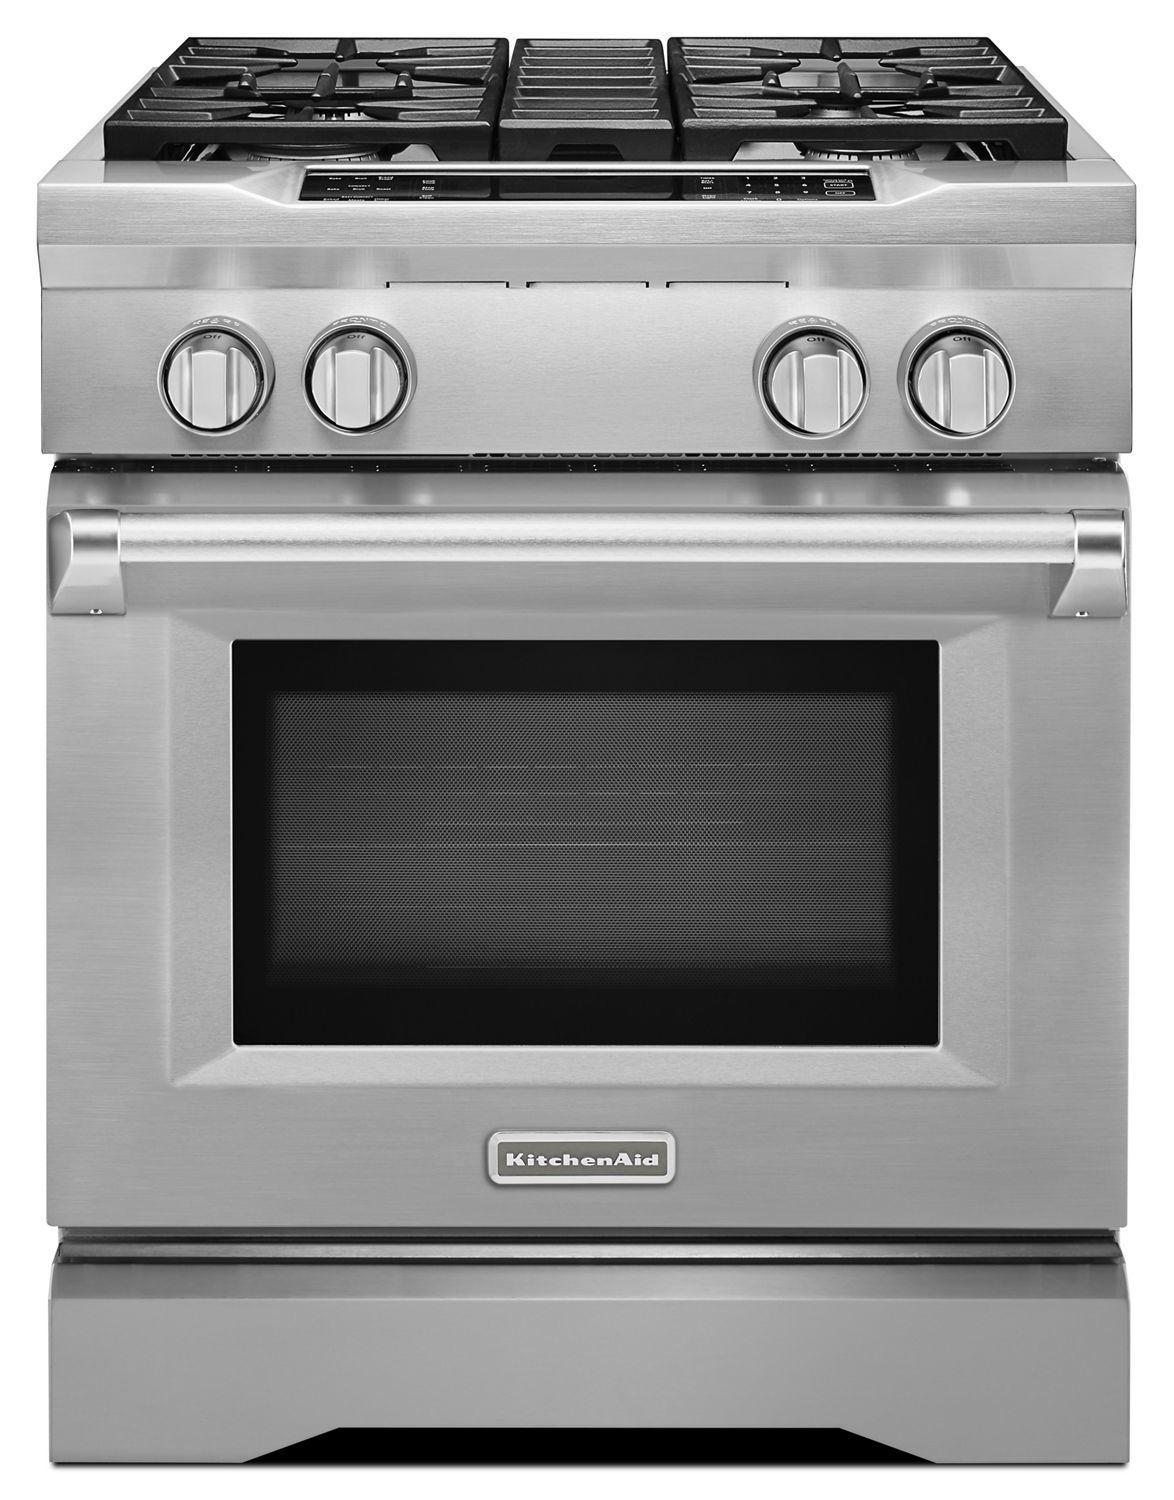 Kitchenaid 30'' 4-Burner Dual Fuel Freestanding Range, Commercial-Style Stainless Steel